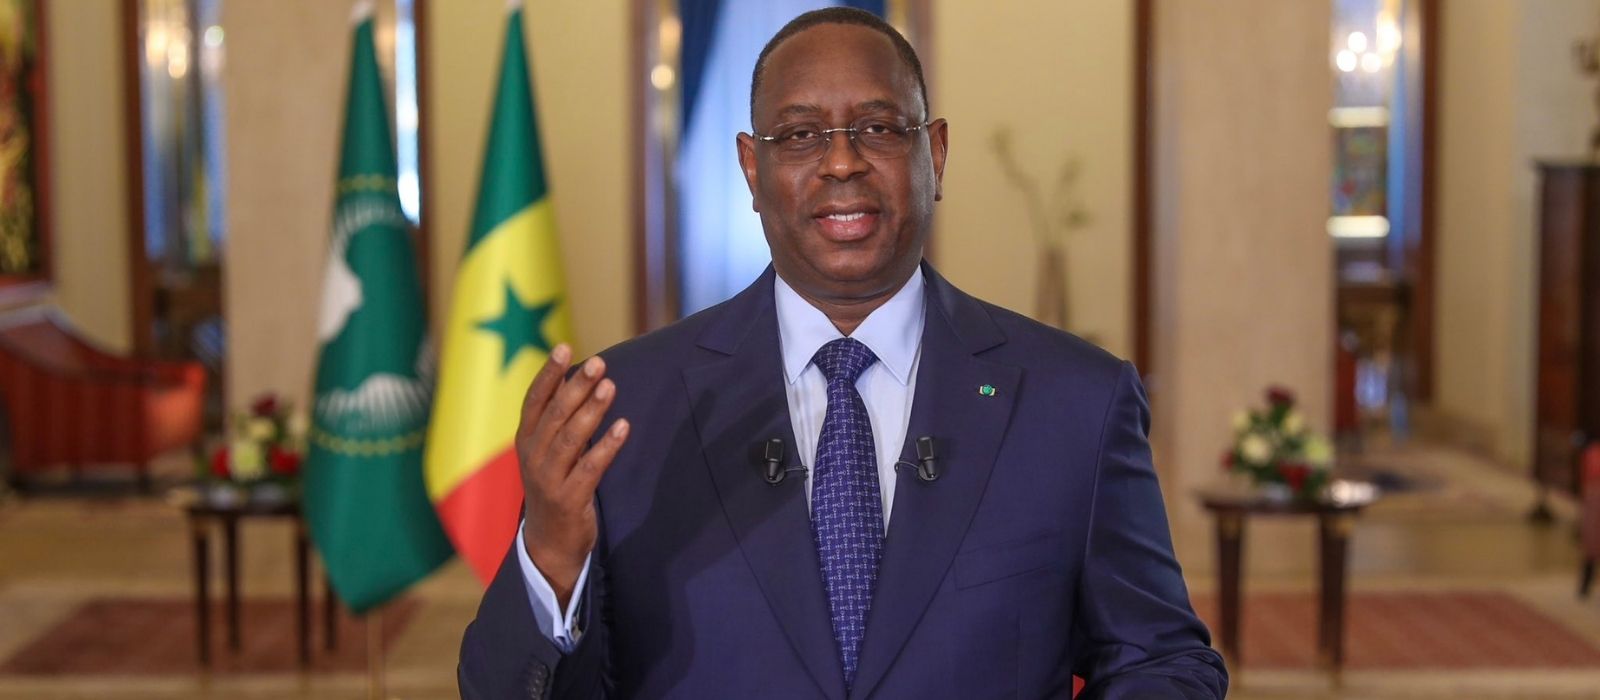 President Sall Macky’s 2nd term in office extended by parliament